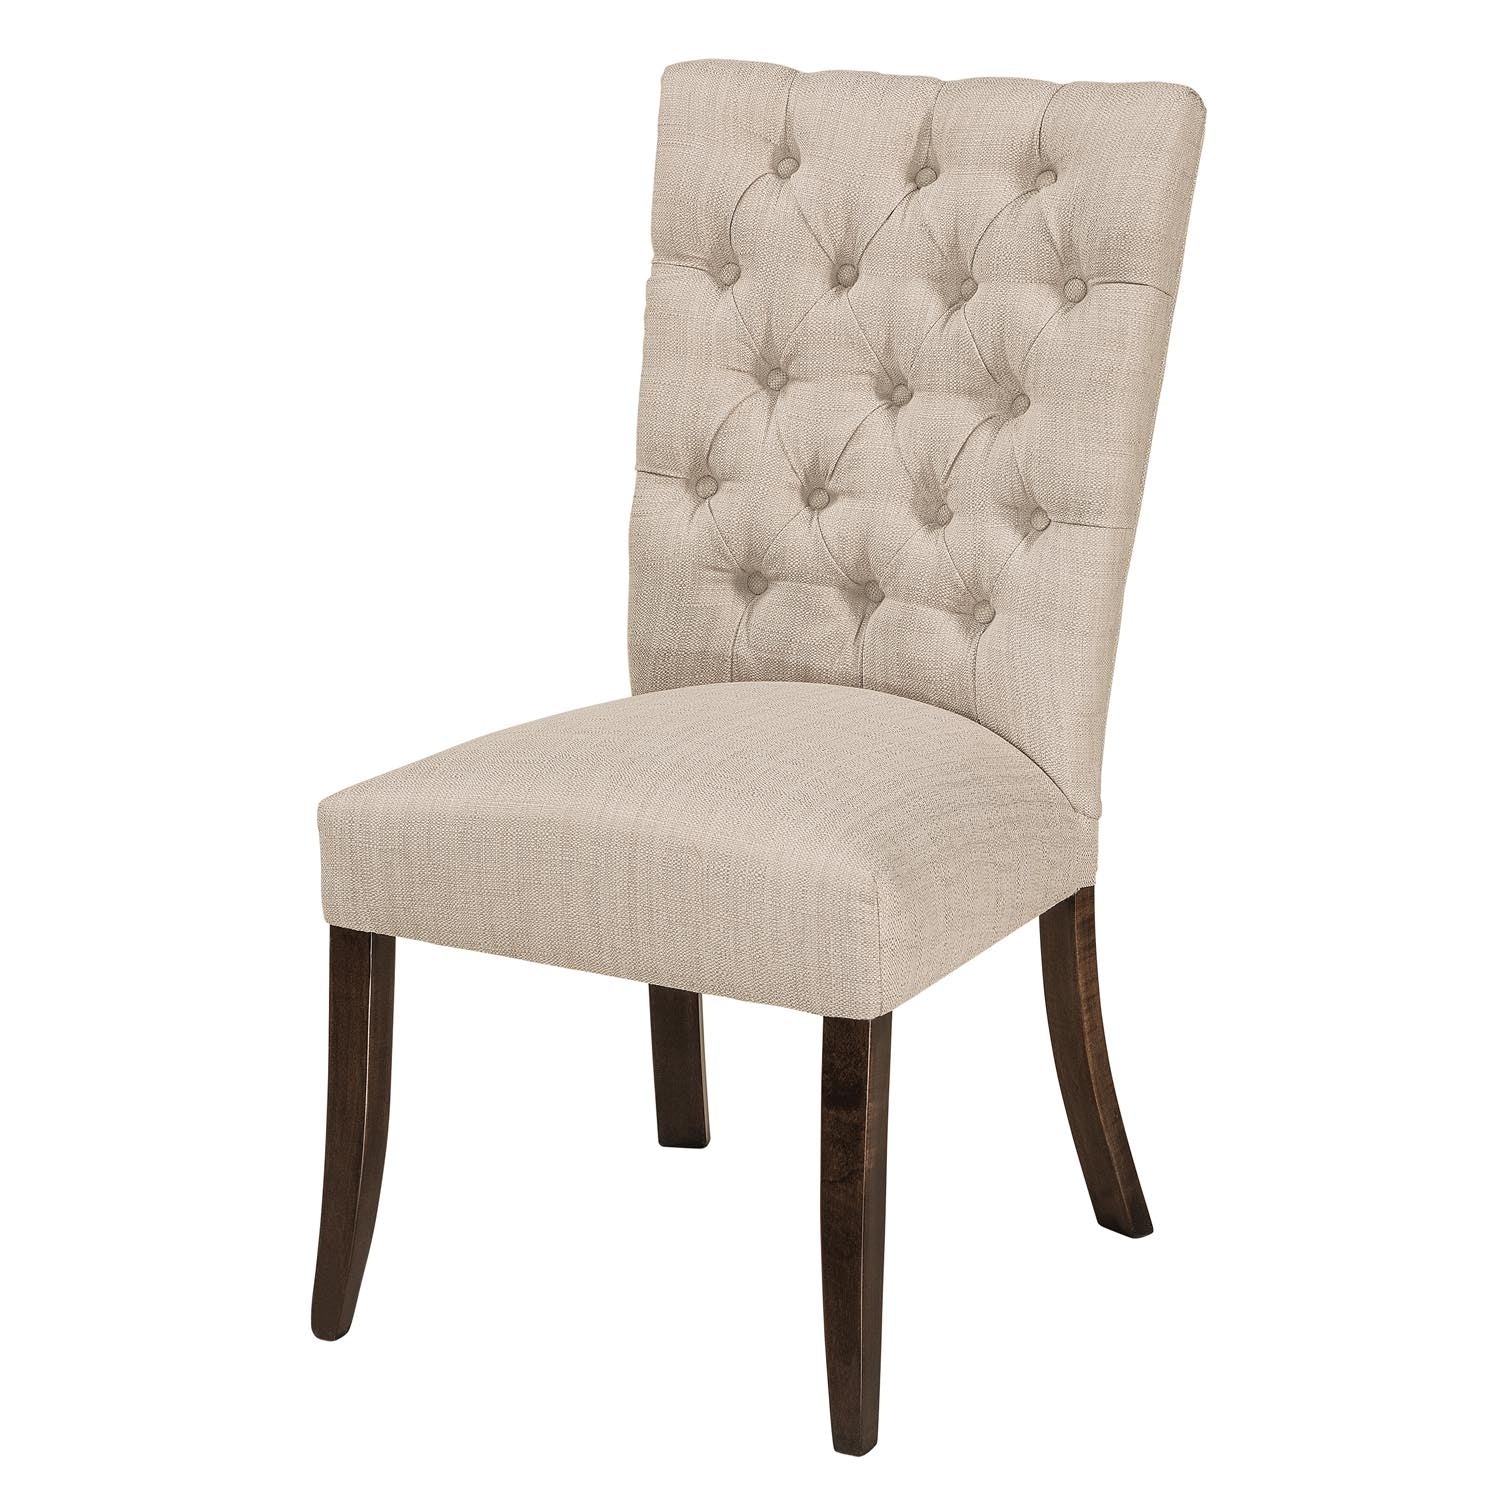 Alana Chair - snyders.furniture